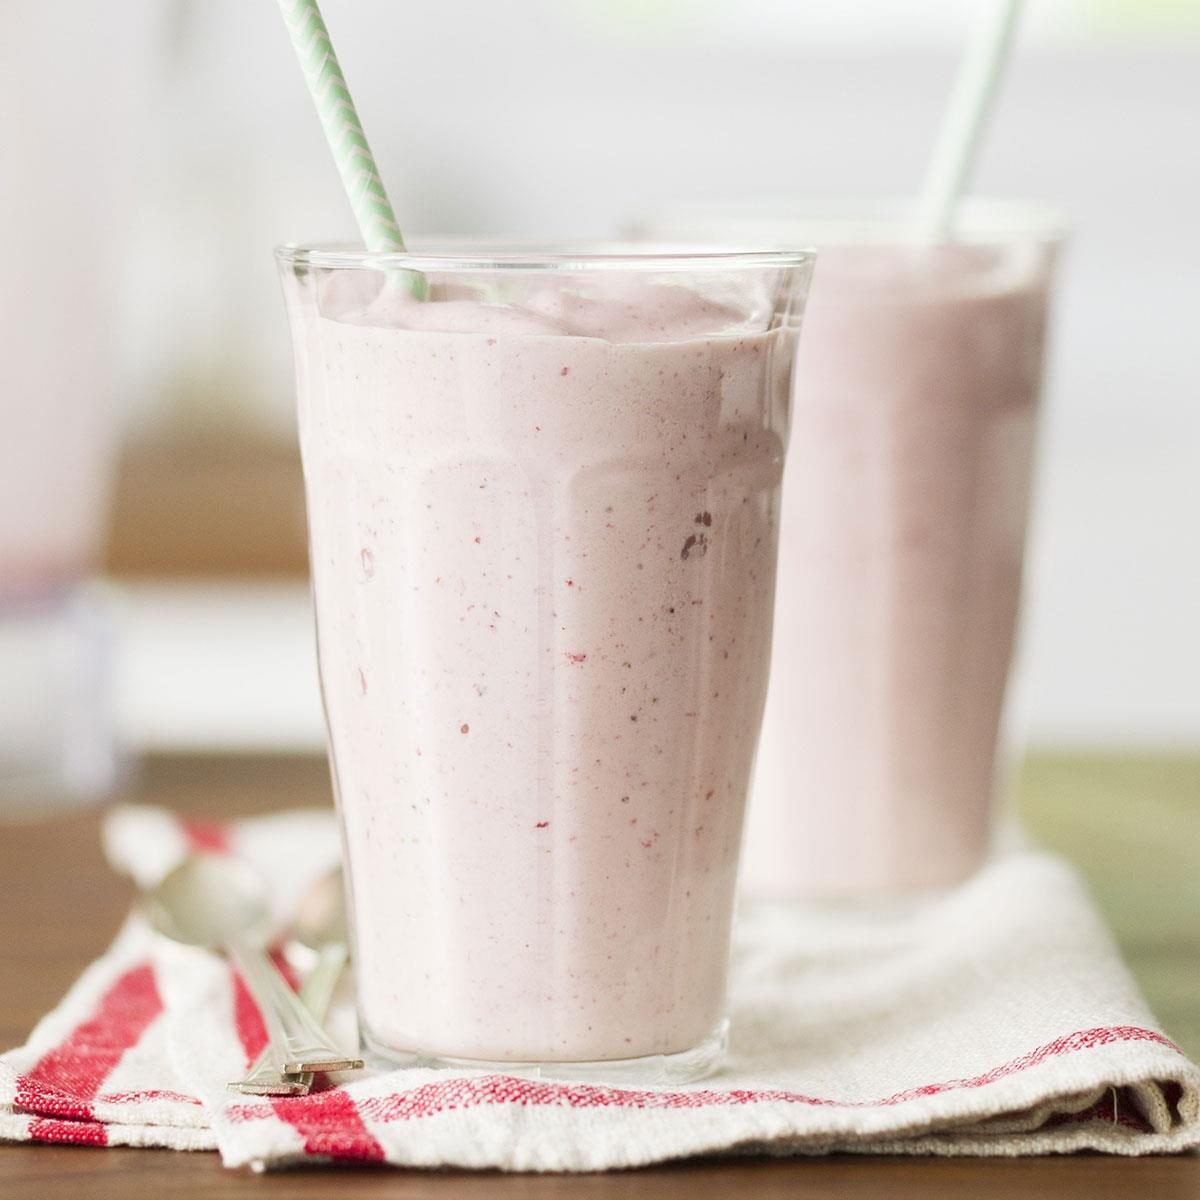 Thick Strawberry Shakes Recipe Taste Of Home,Types Of Birch Trees In Mn